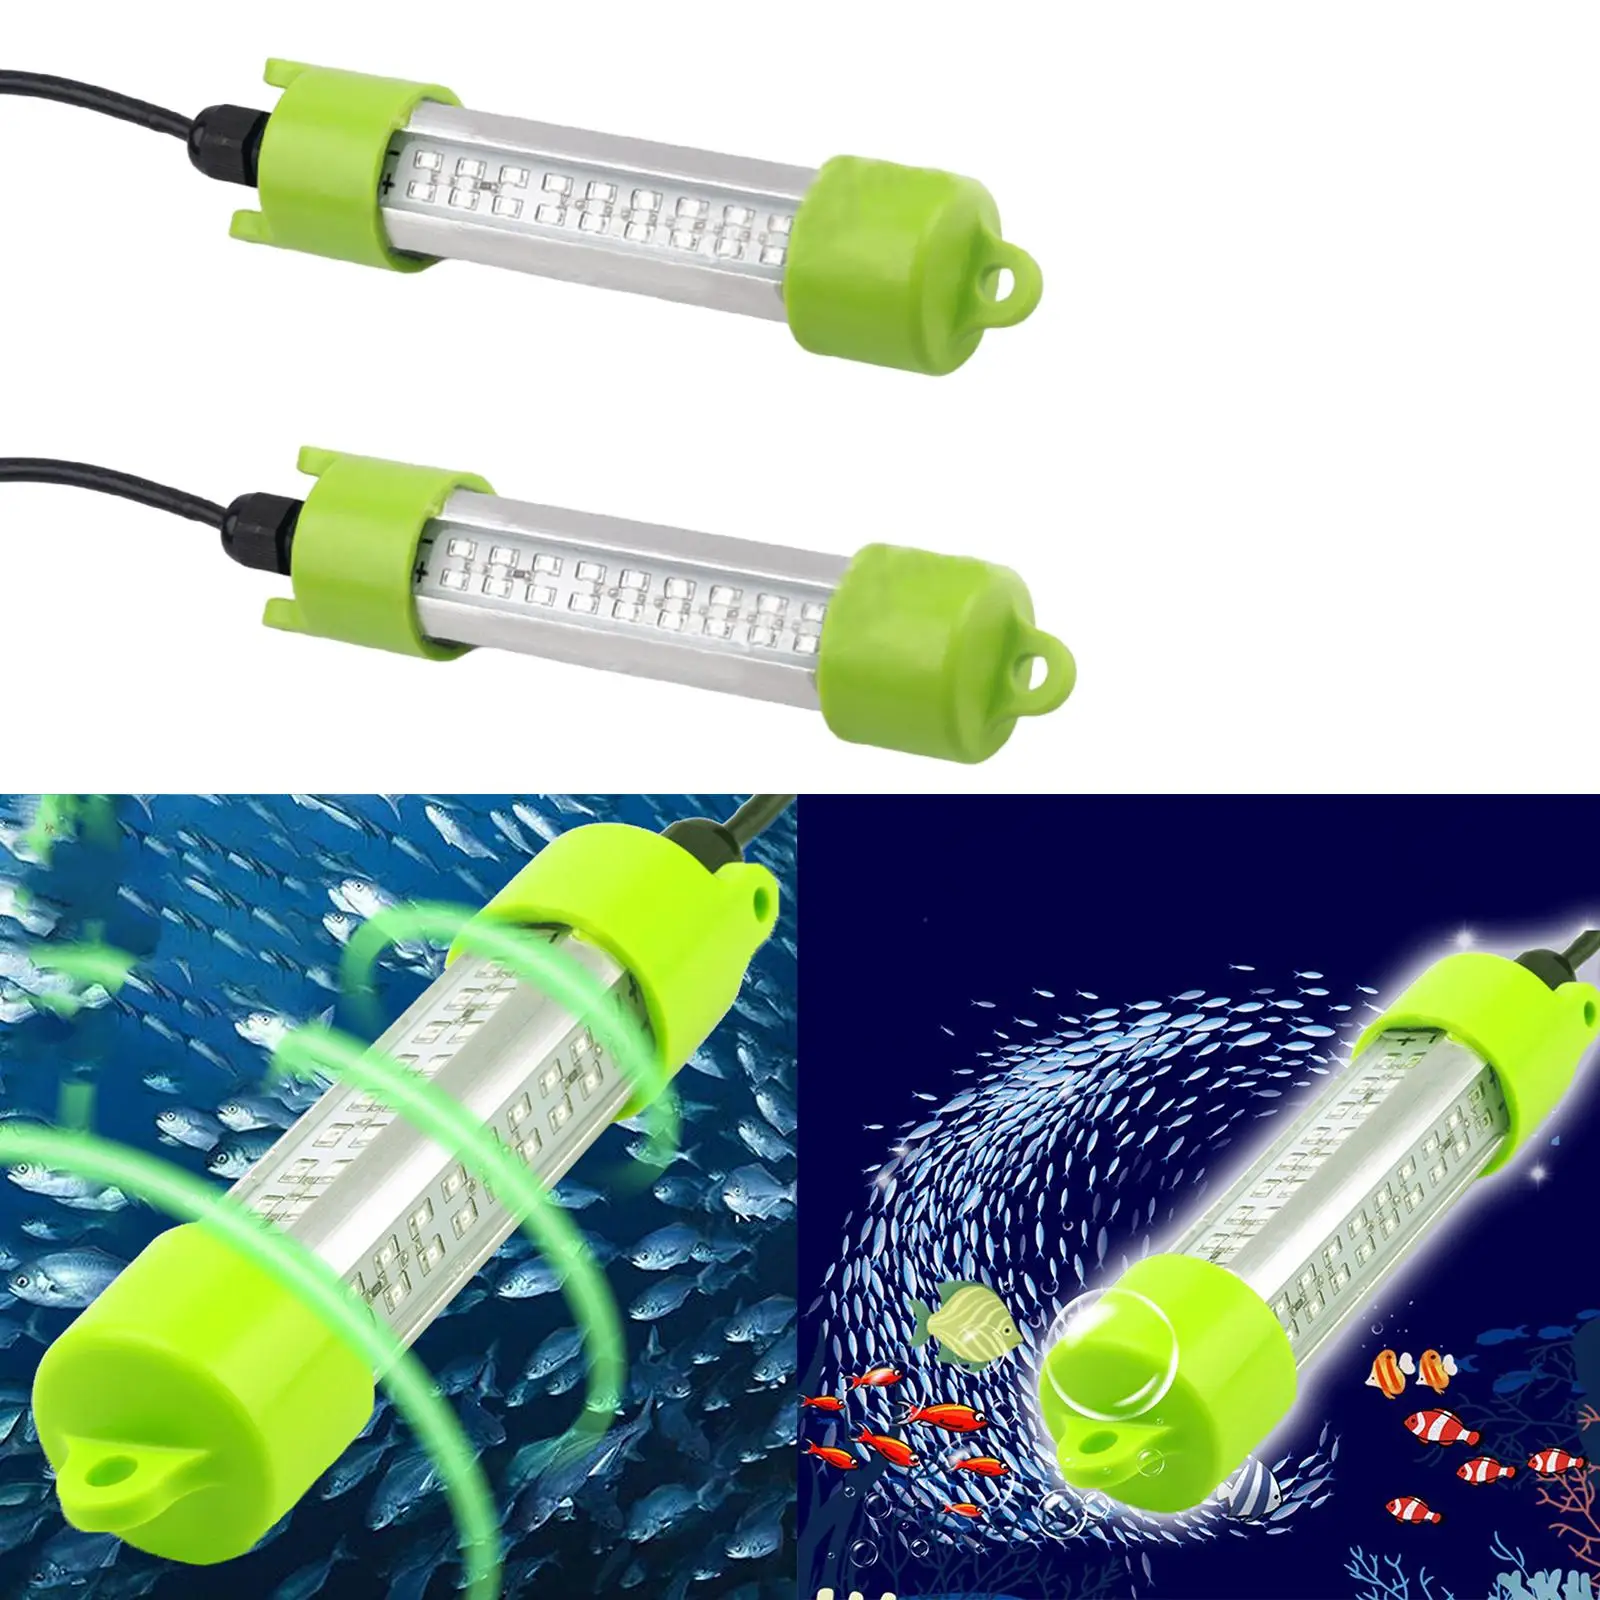 12V 45W Underwater Fishing Light Fish Finder Lamp Attract Waterproof Lures Bait Squid Shrimp Light with 7.5m Cord